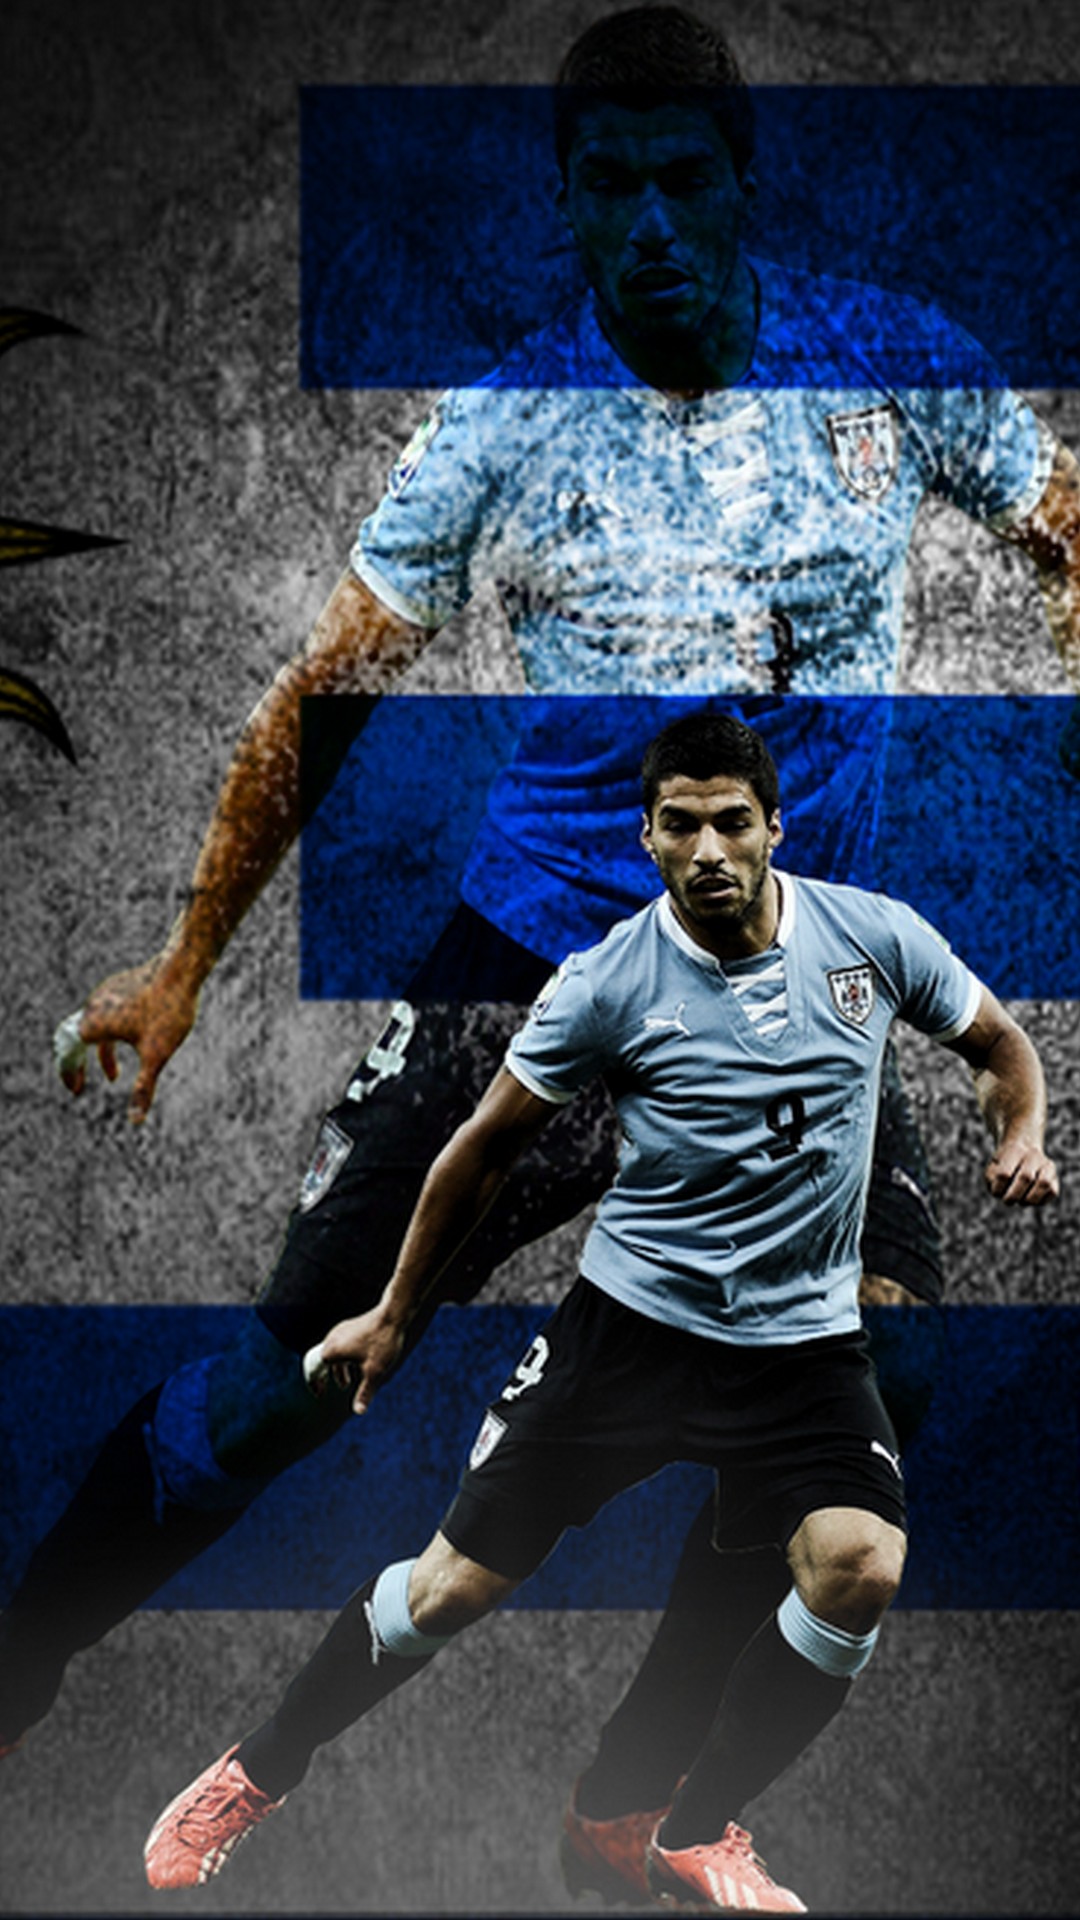 Luis Suarez Uruguay iPhone Wallpaper with resolution 1080X1920 pixel. You can make this wallpaper for your iPhone 5, 6, 7, 8, X backgrounds, Mobile Screensaver, or iPad Lock Screen